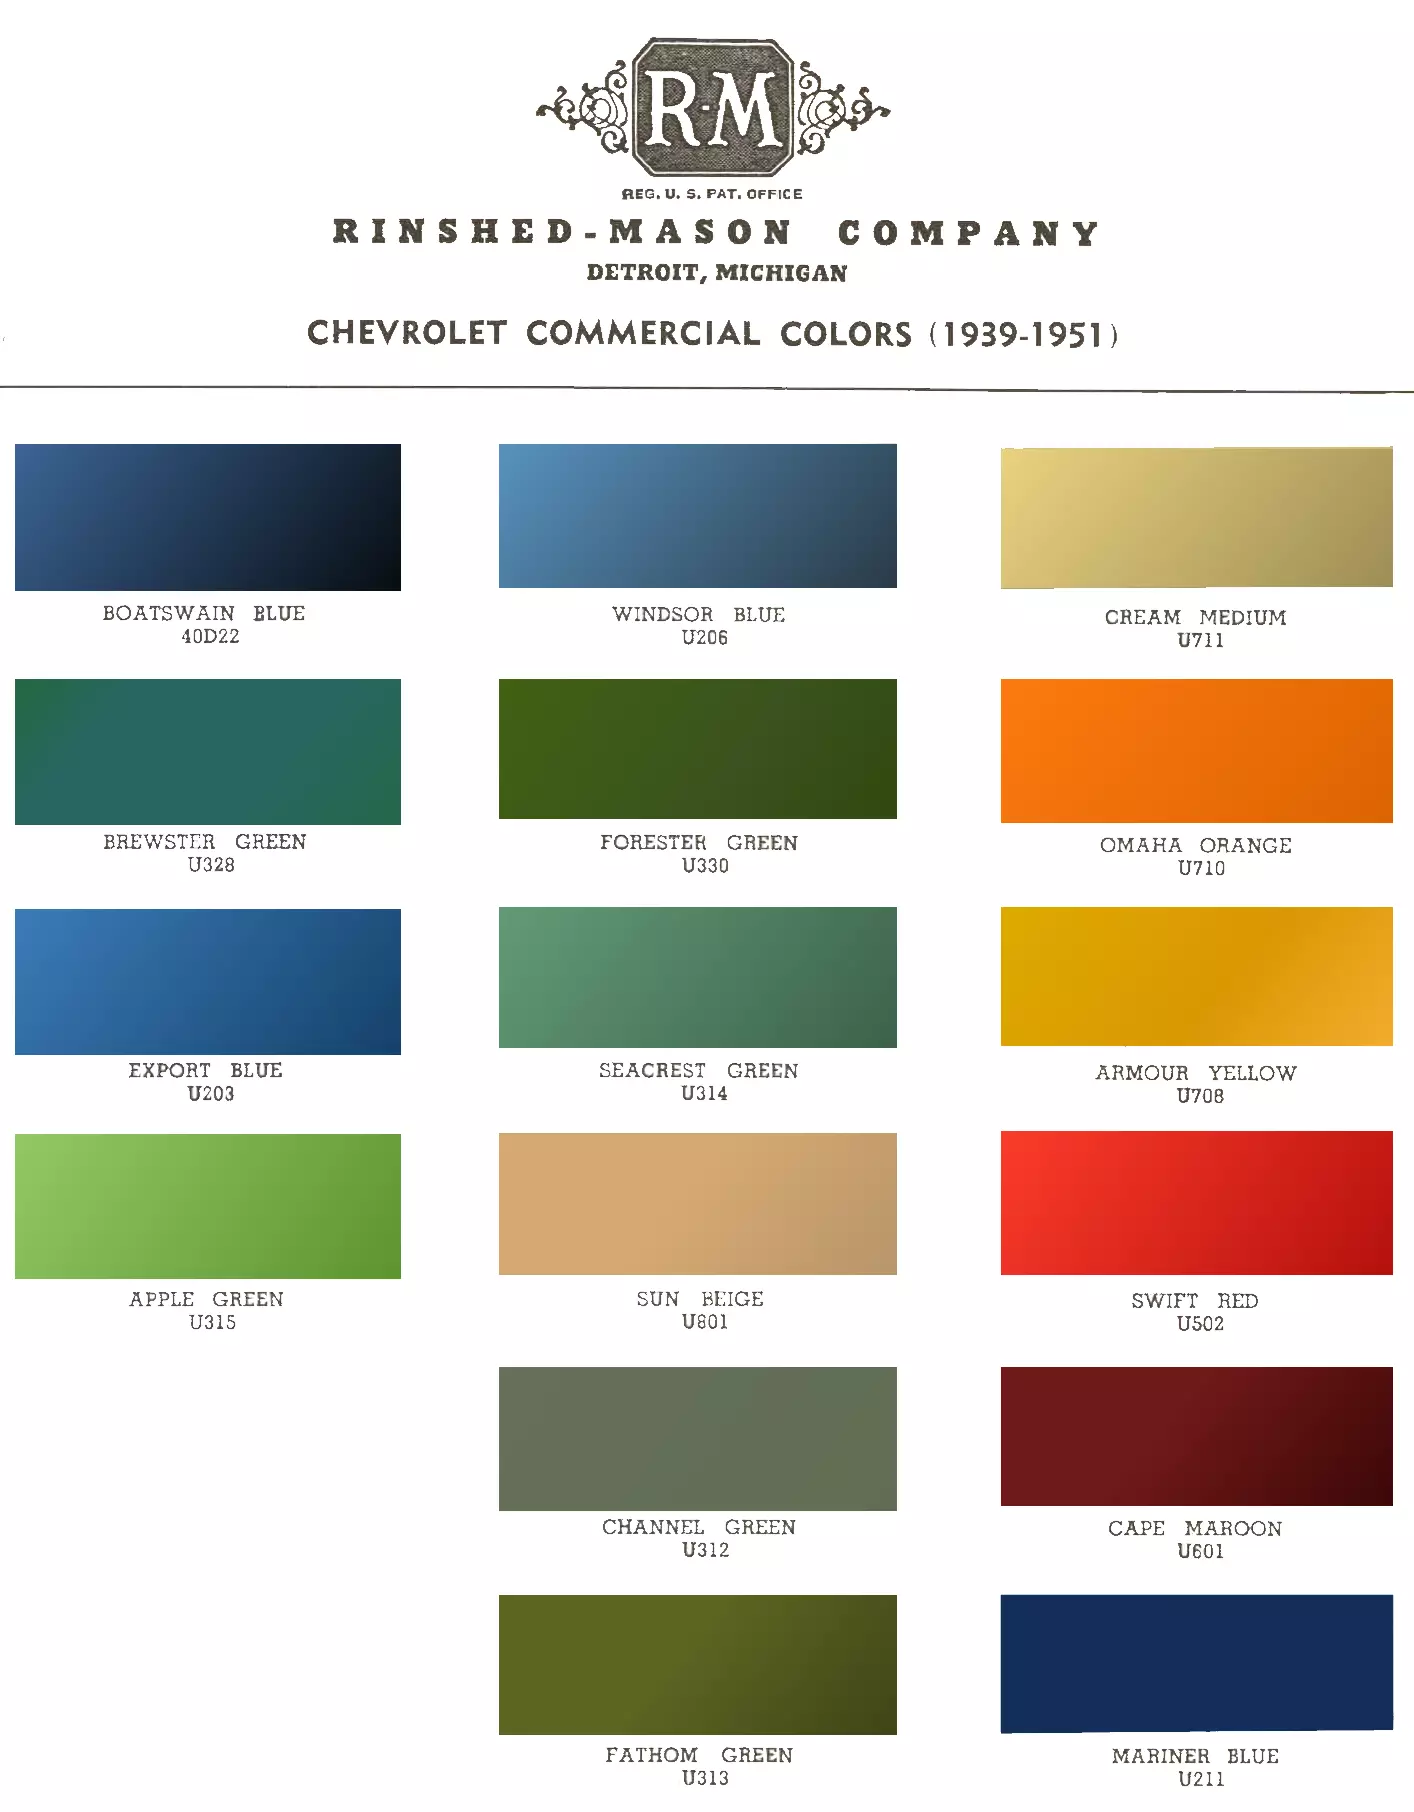 Exterior Colors used on Chevrolet Vehicles in 1939